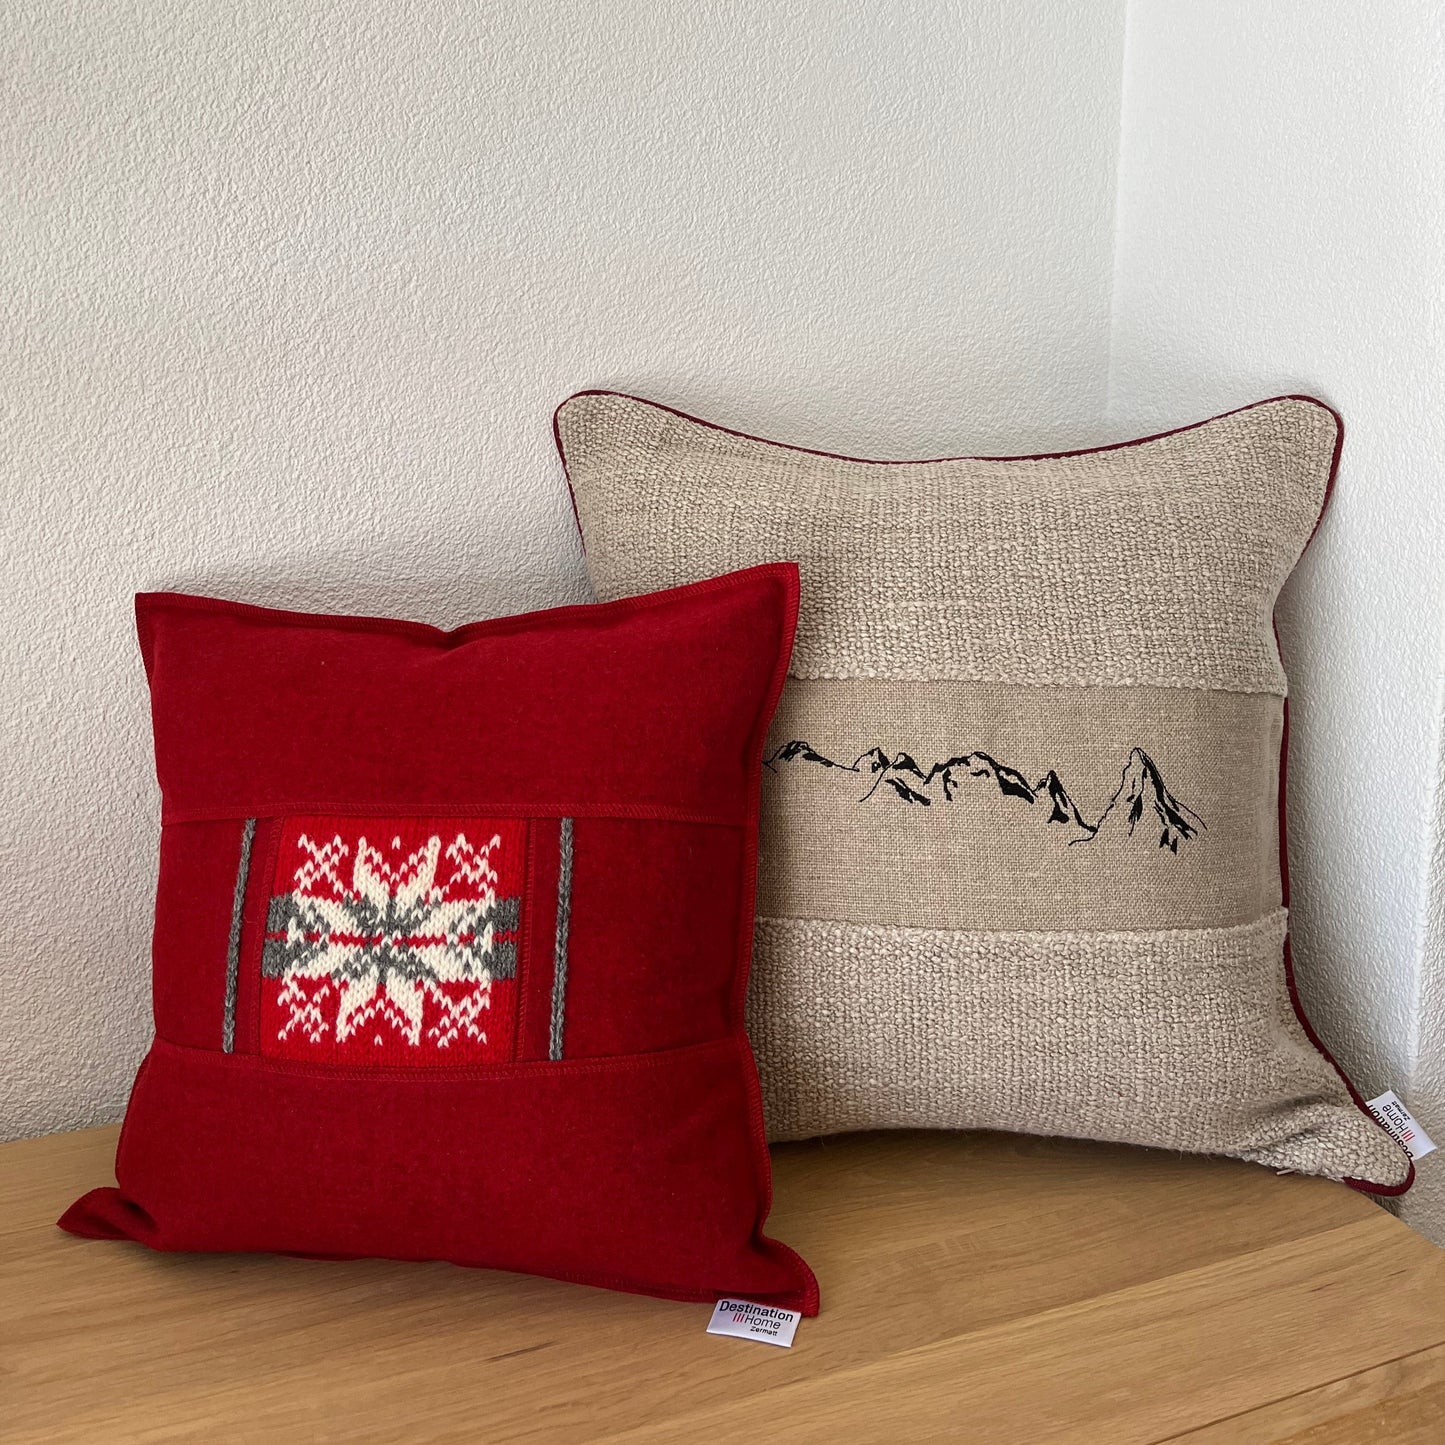 Mountain Panorama cushion cover, red piping